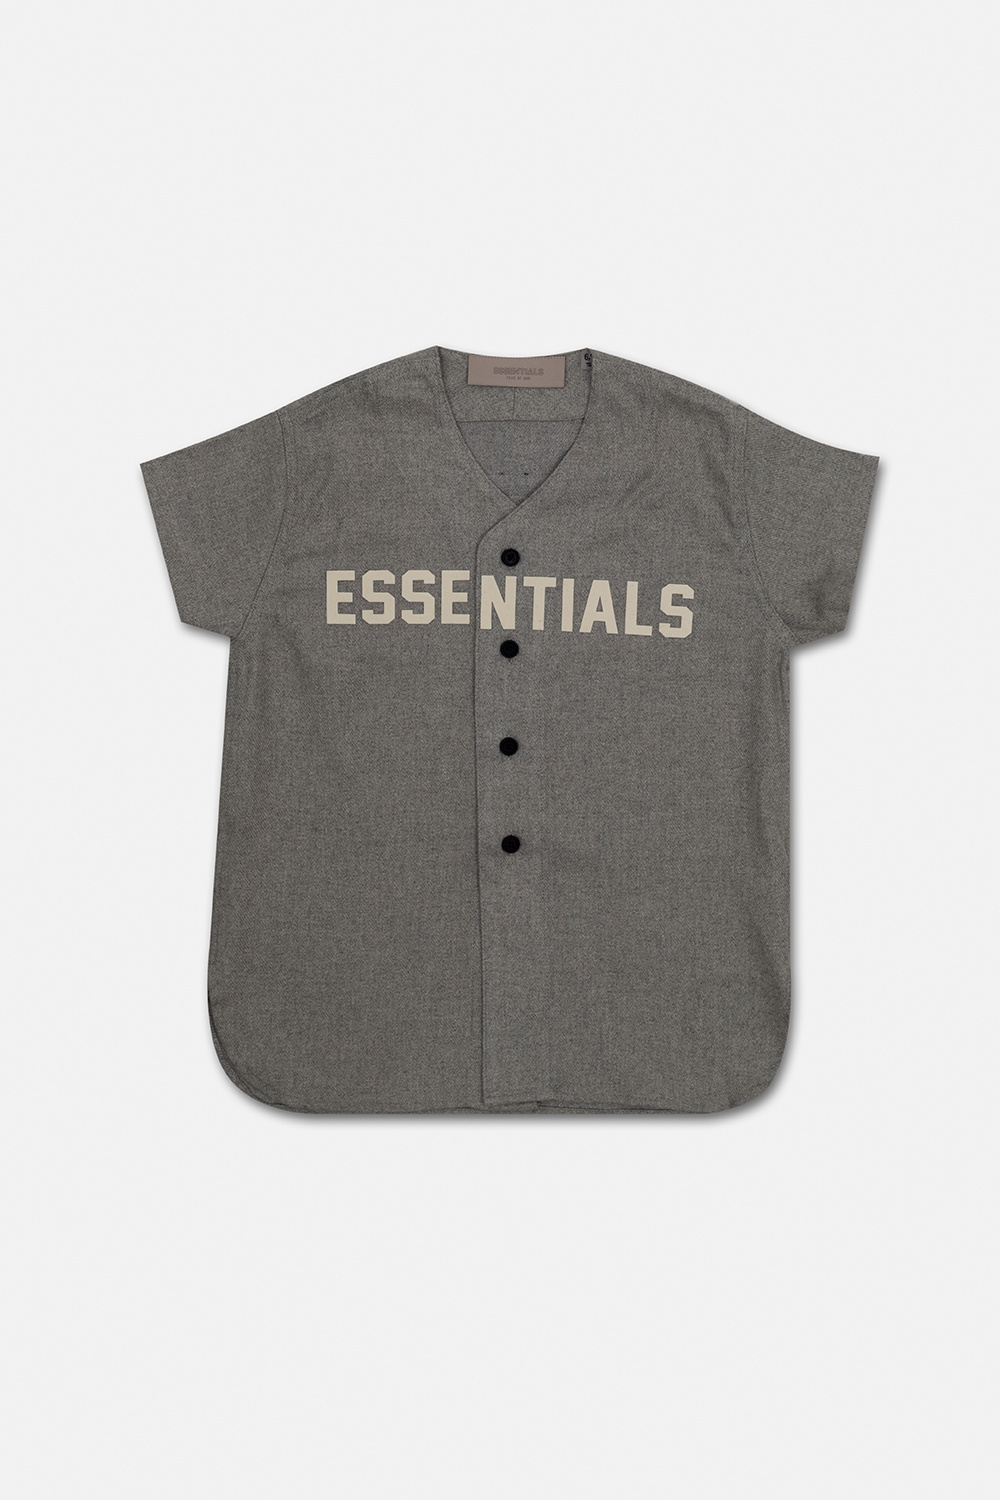 Fear Of God Essentials Kids Top with short sleeves